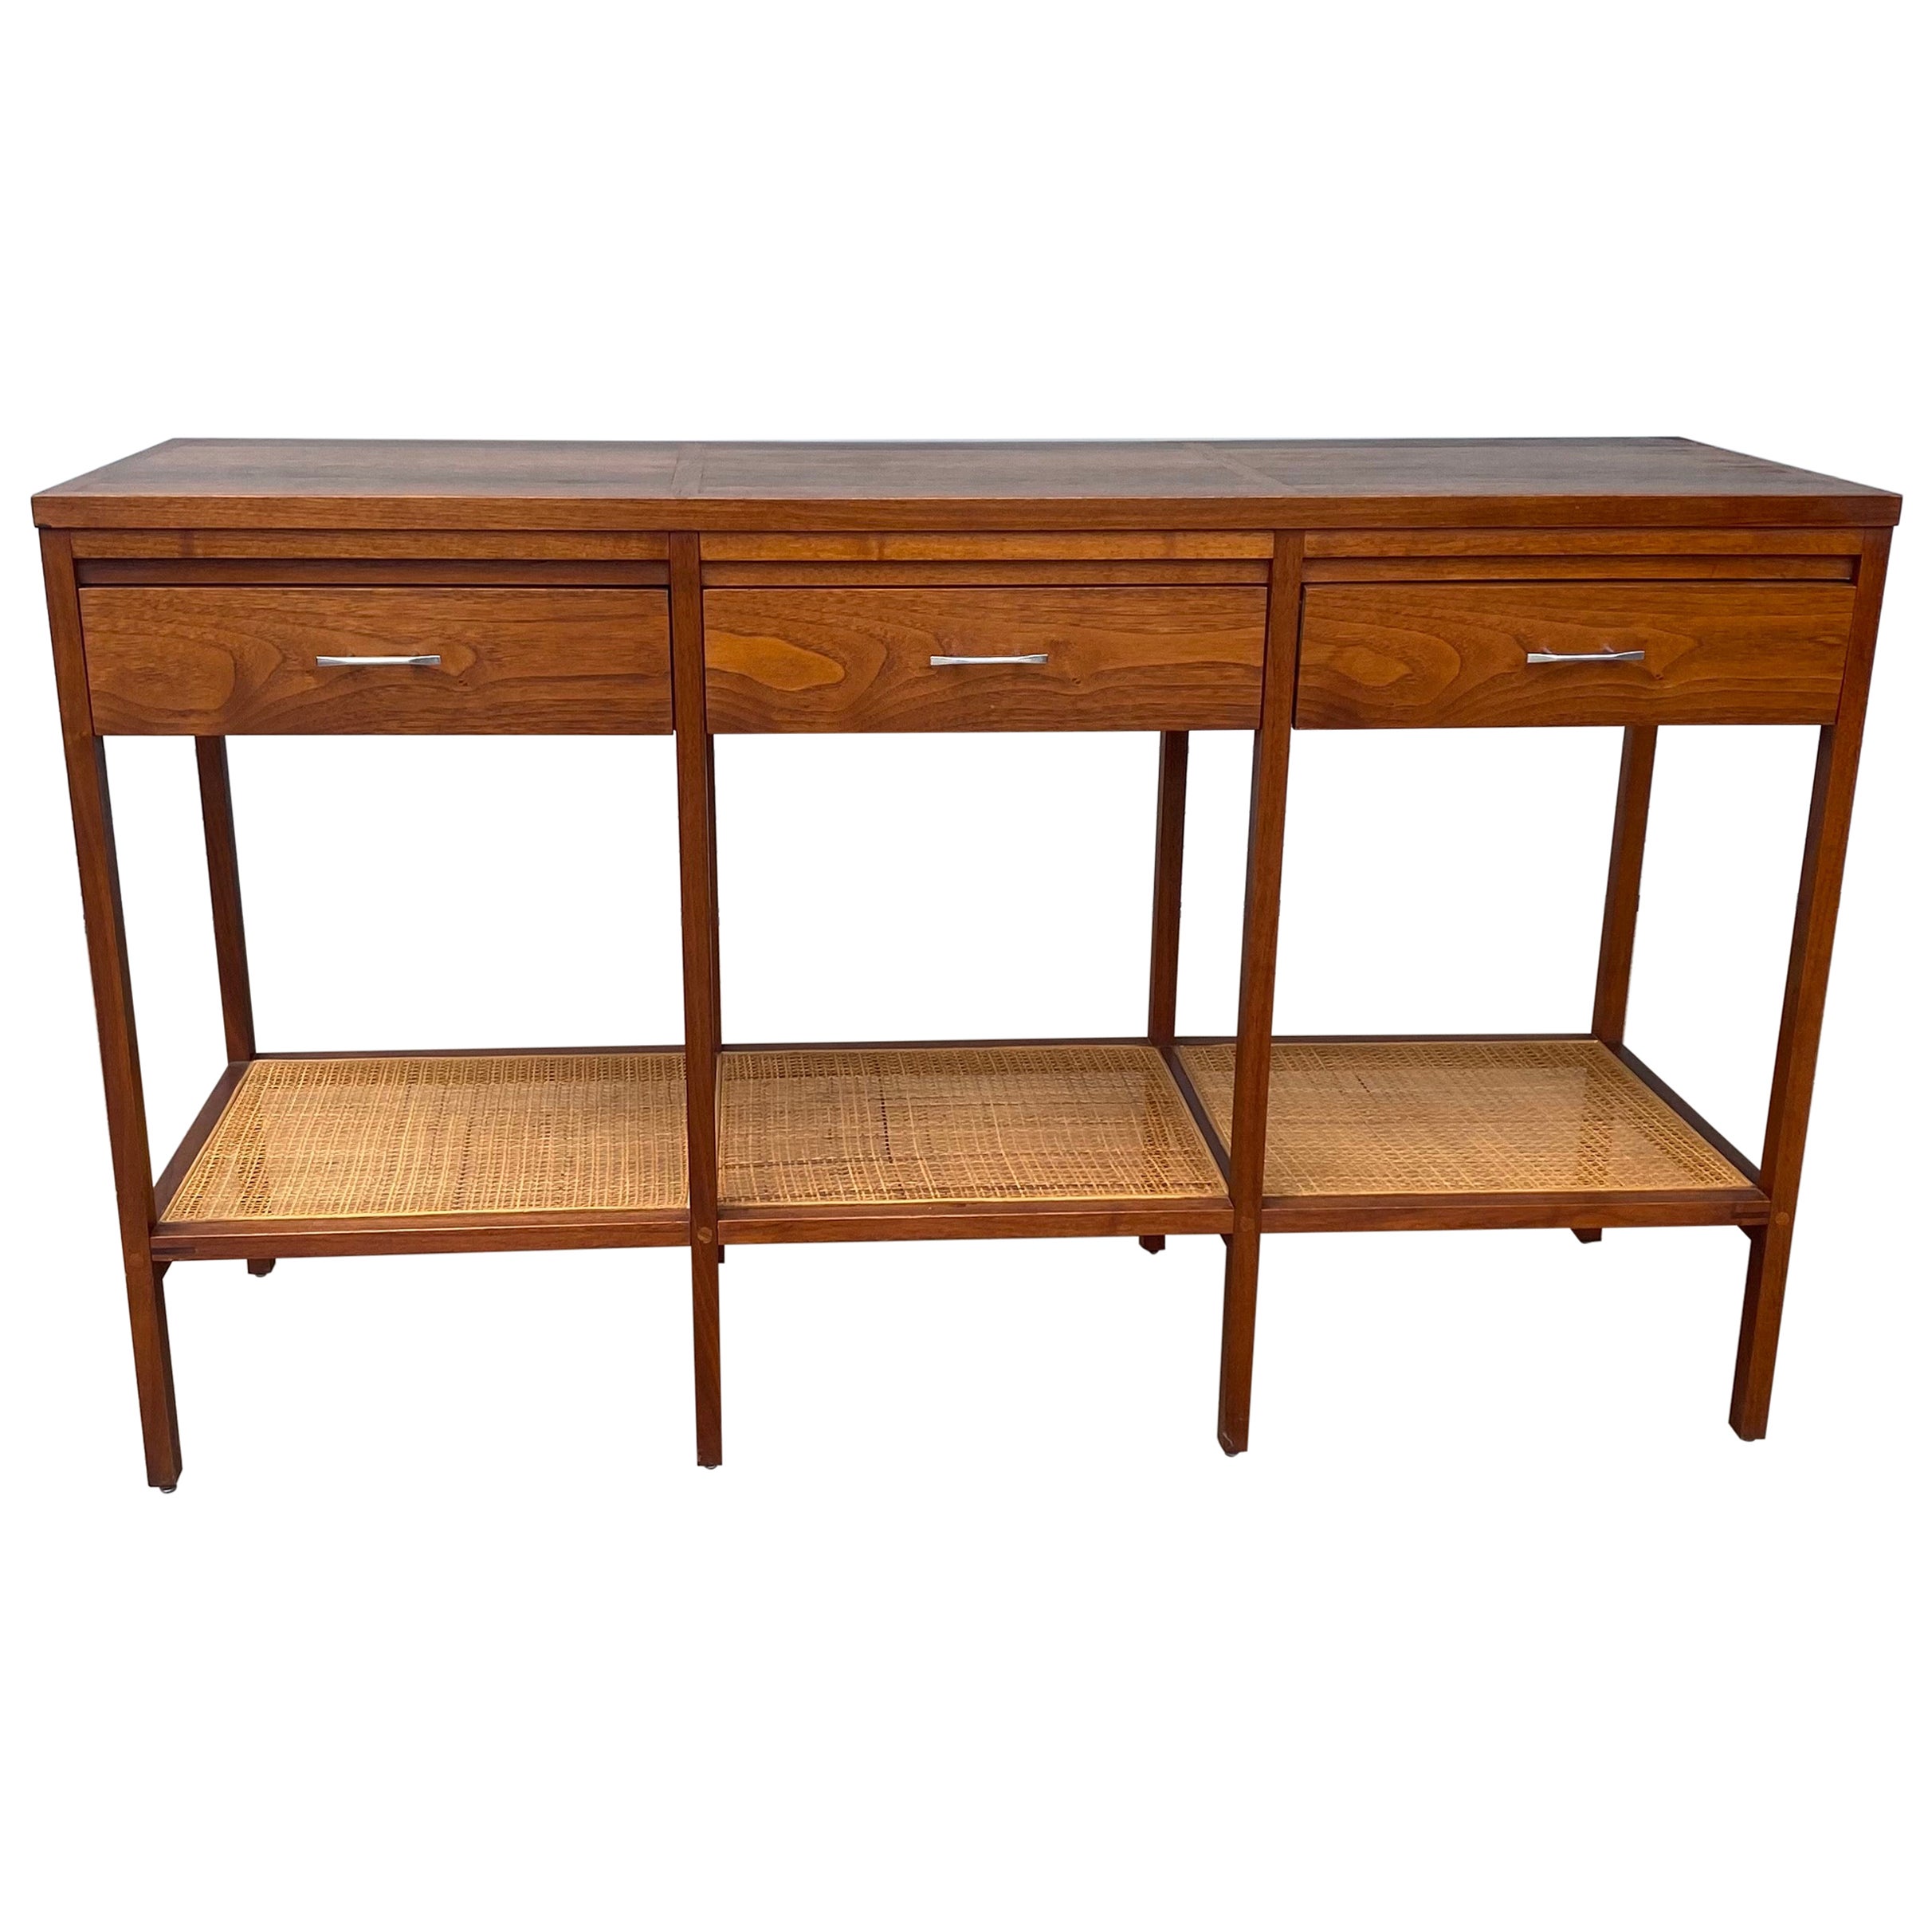 Stunning Rosewood and Cane Console Table, Paul McCobb for Lane / Delineator